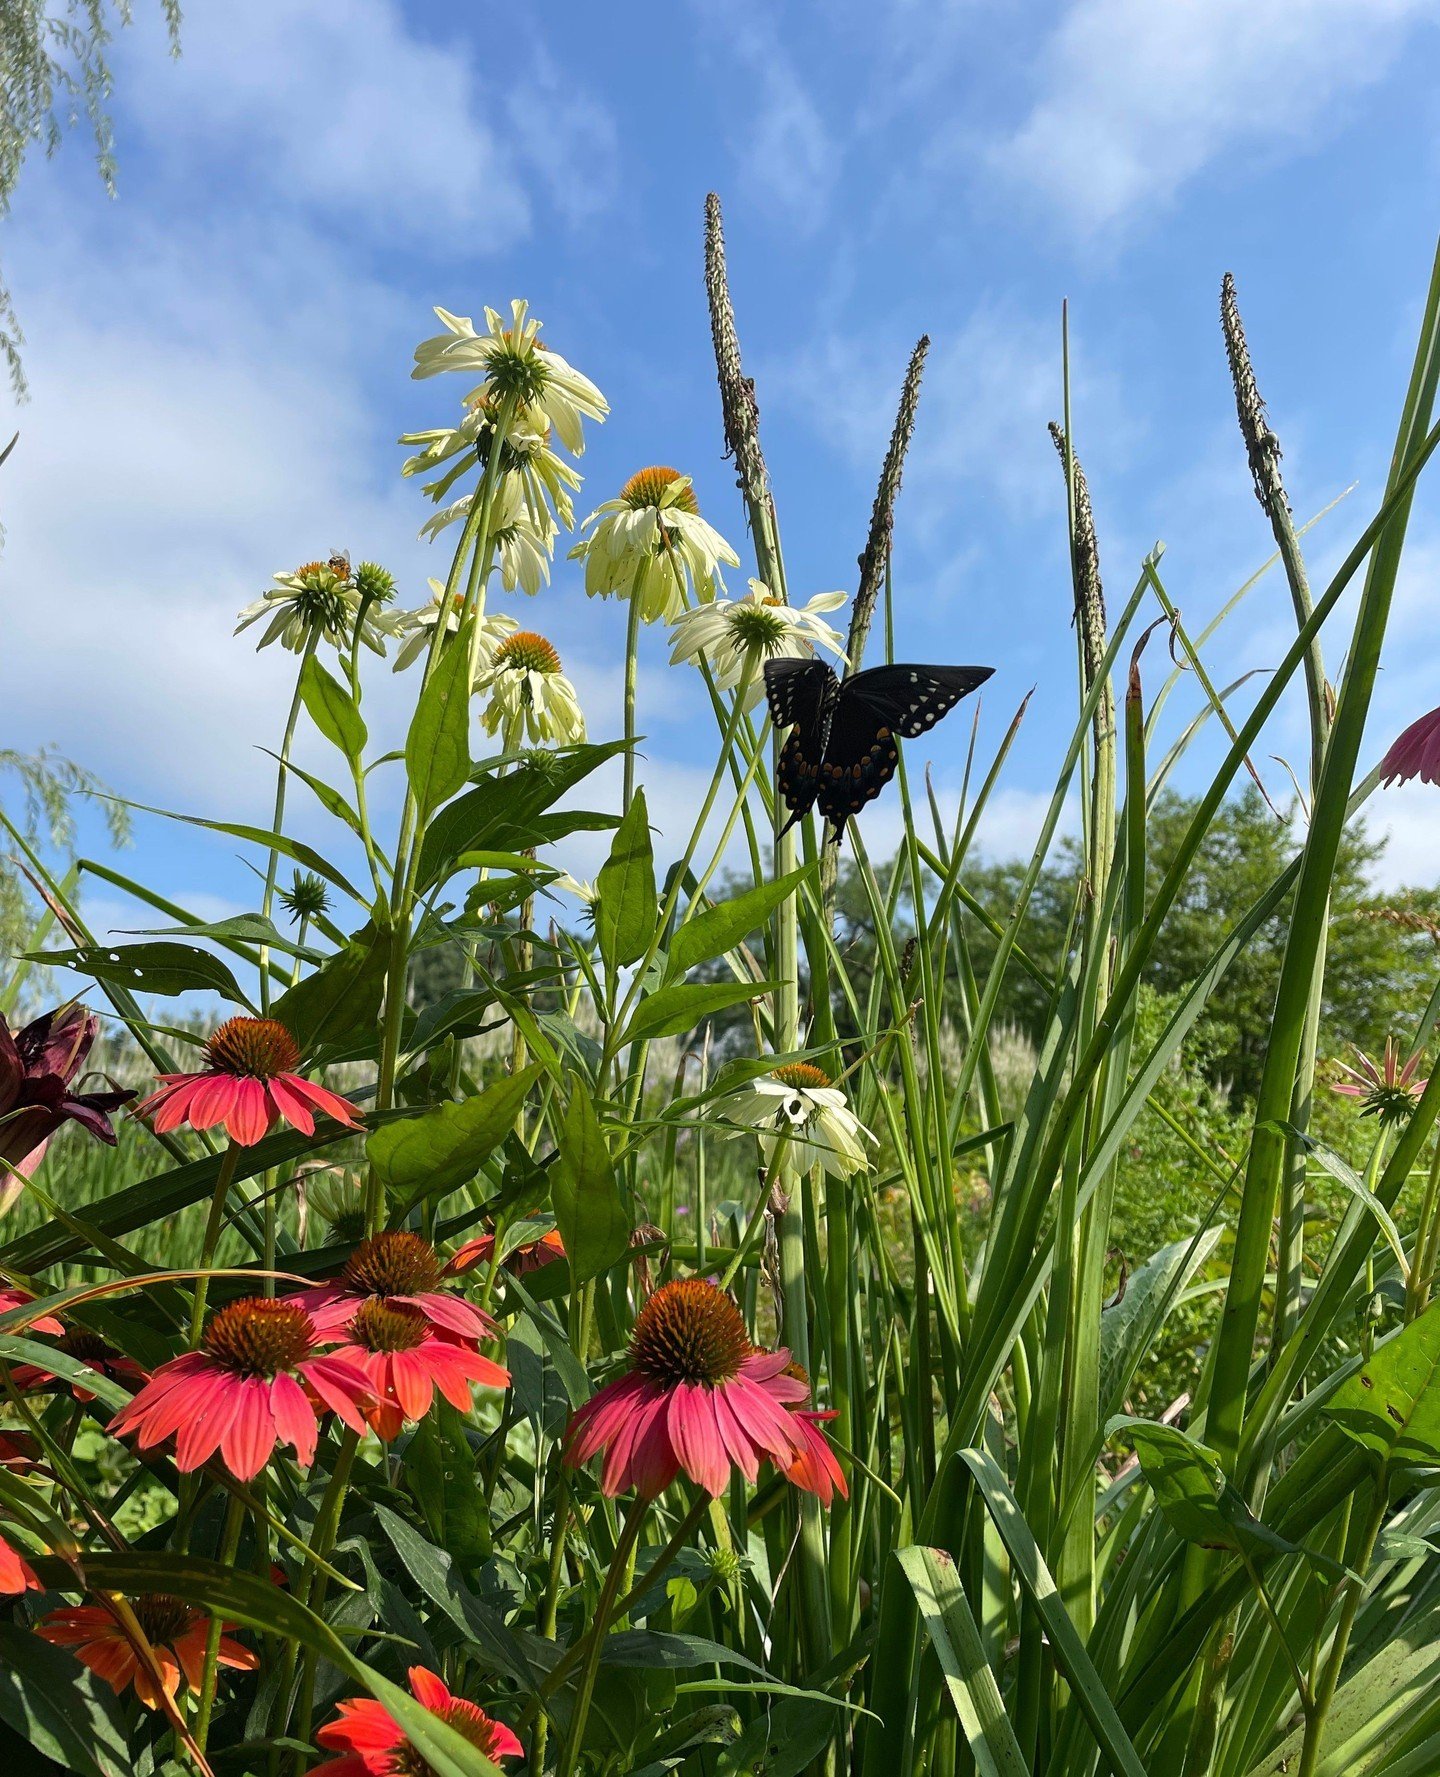 A striking vantage point from inside a pollinator garden, created and maintained by our ecological land care division, @botanicalandcare.⁠